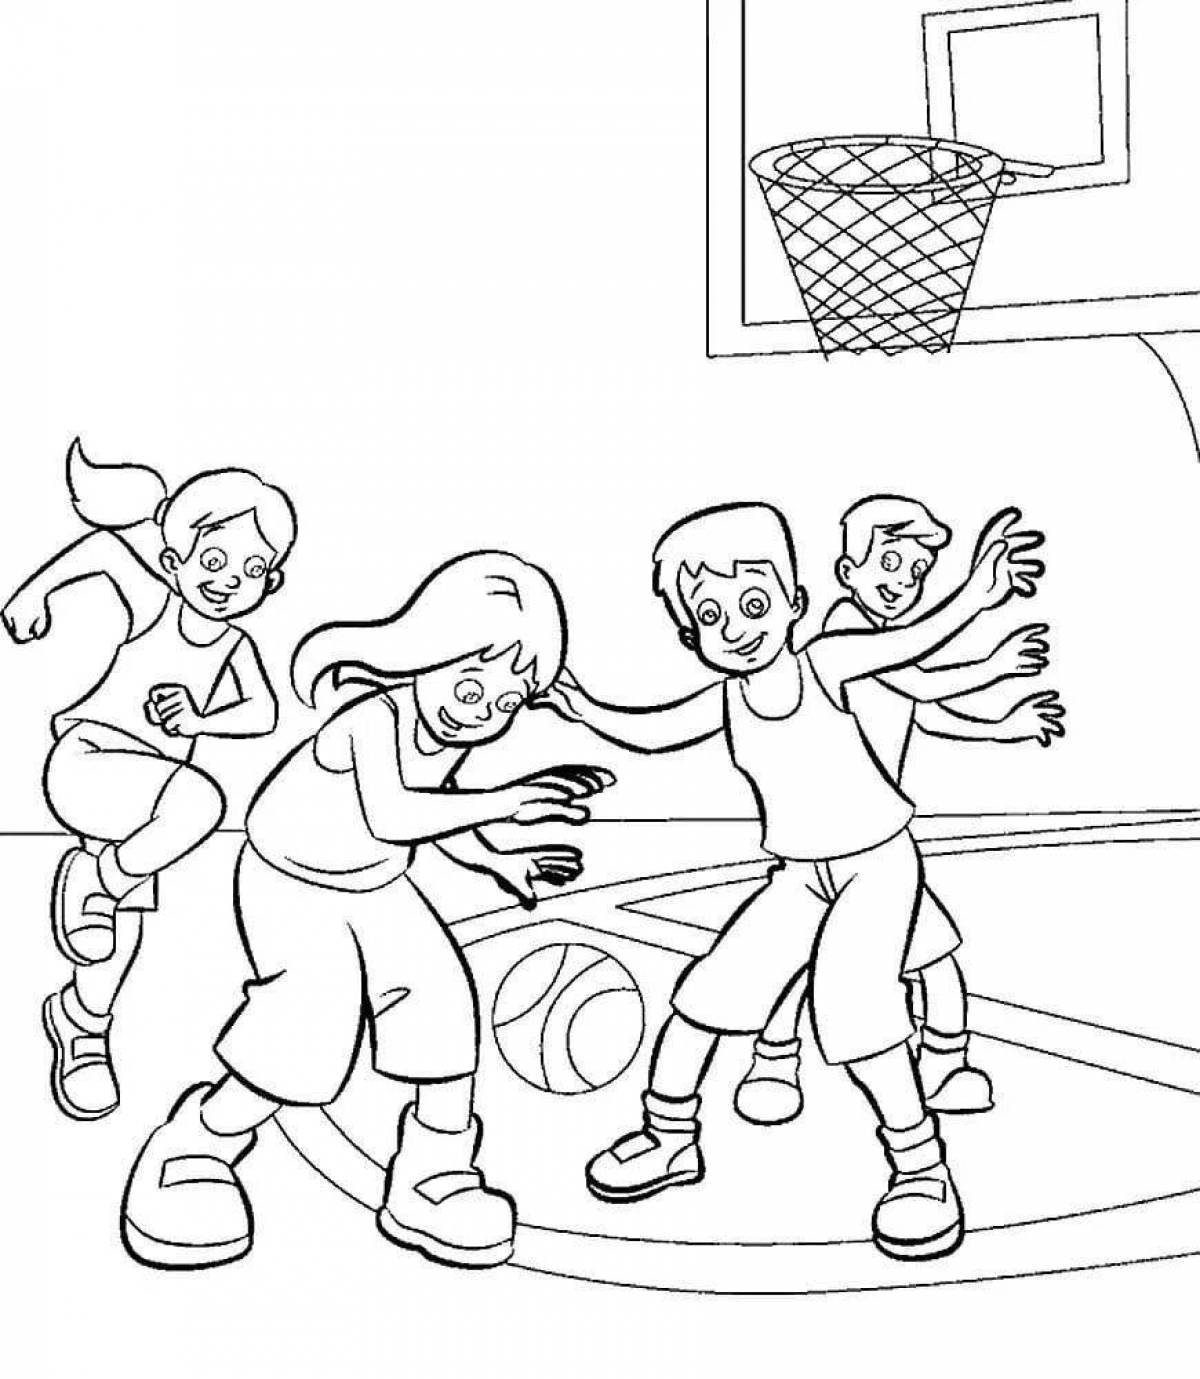 Coloring book innovative physical education Grade 1